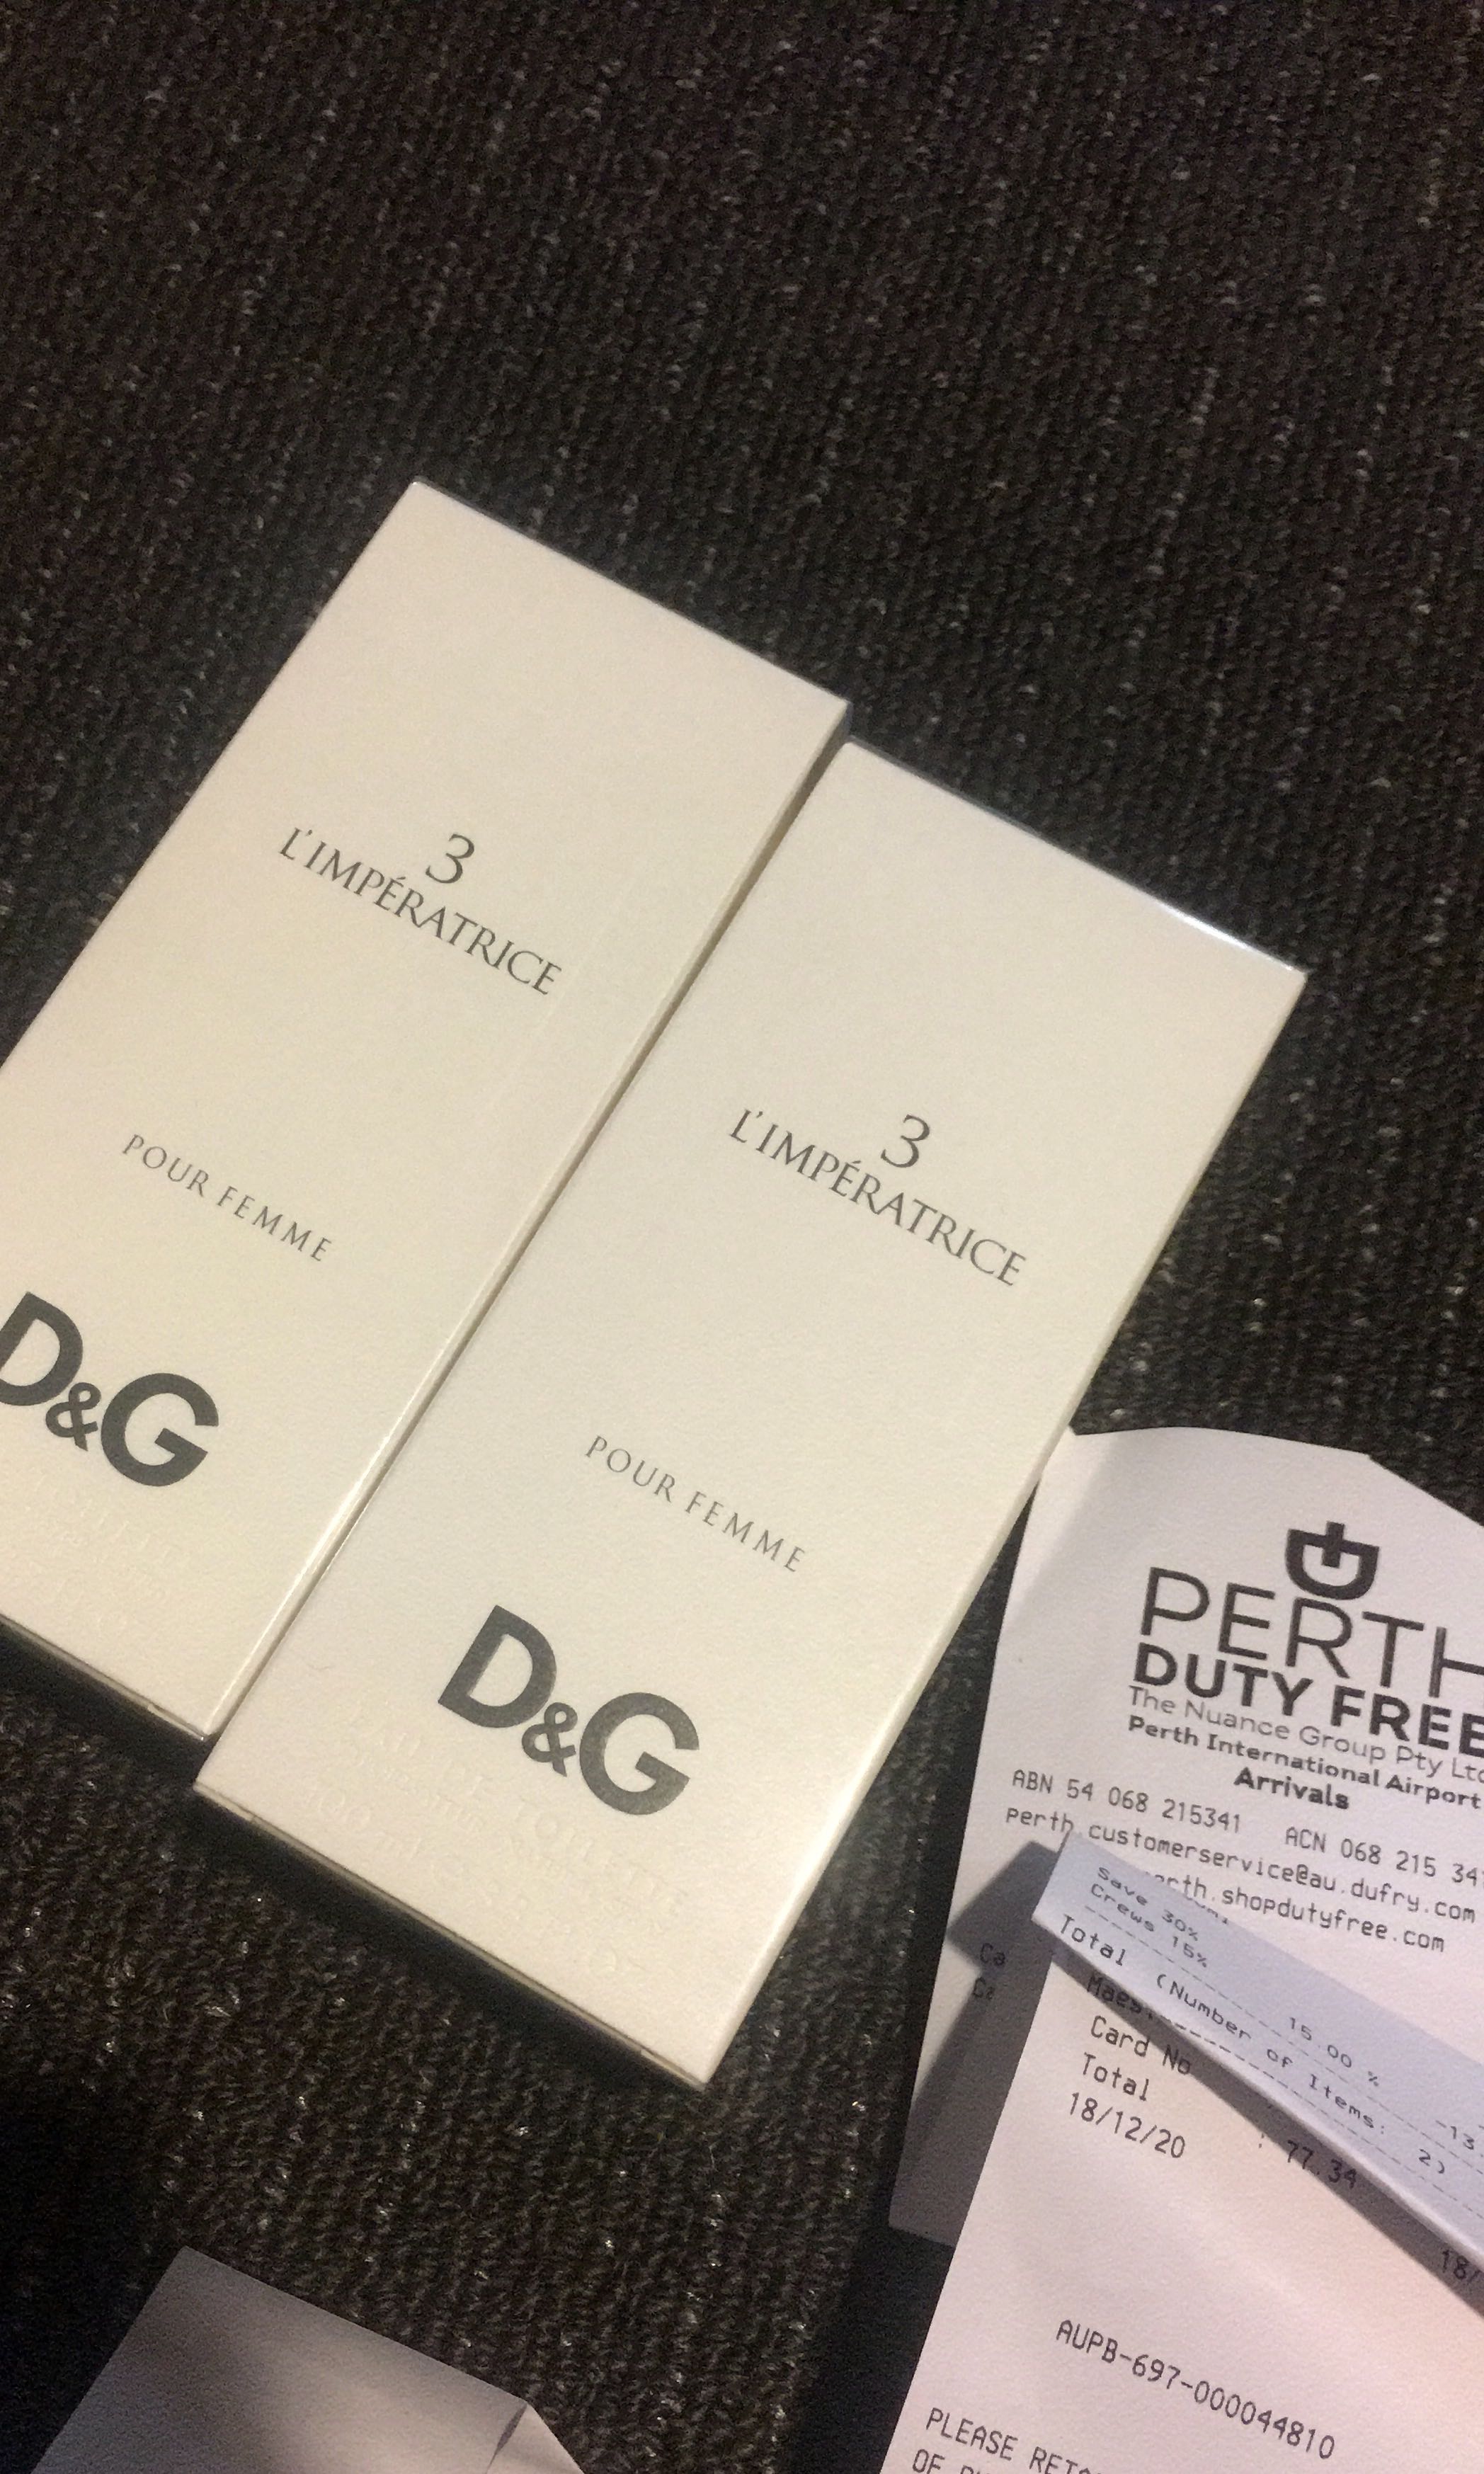 d and g perth